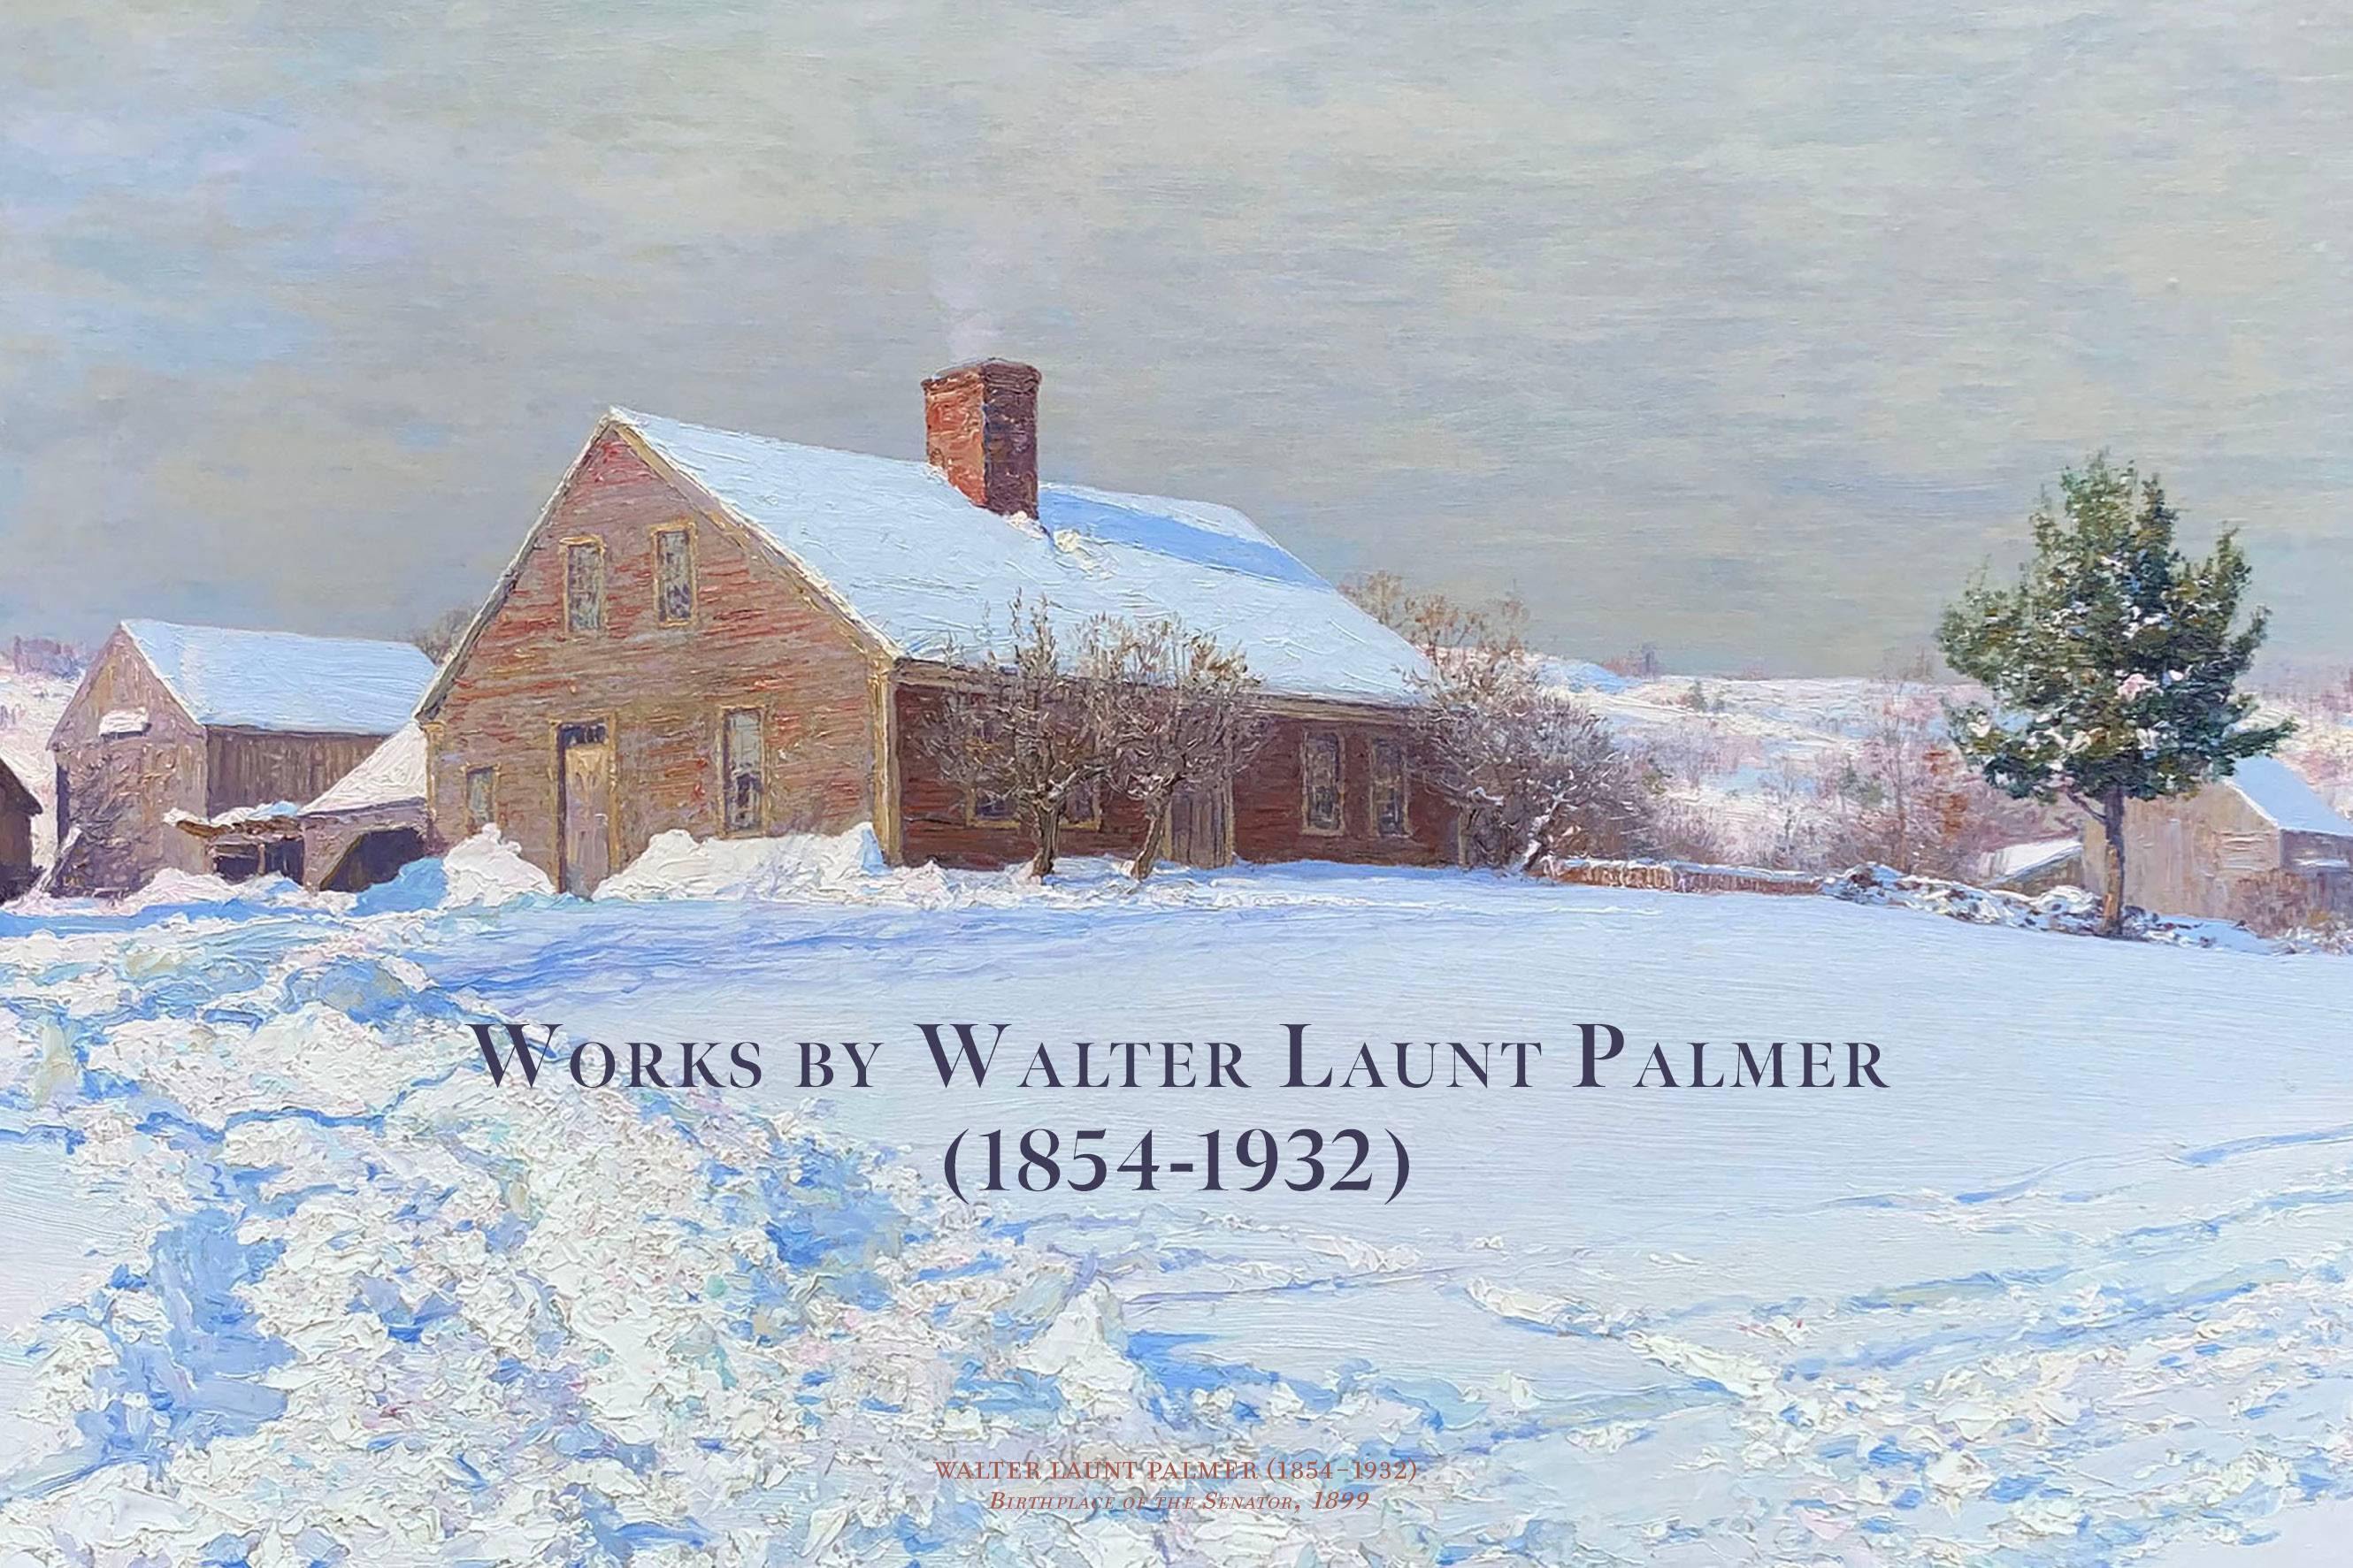 Works by Walter Launt Palmer (1854-1932)